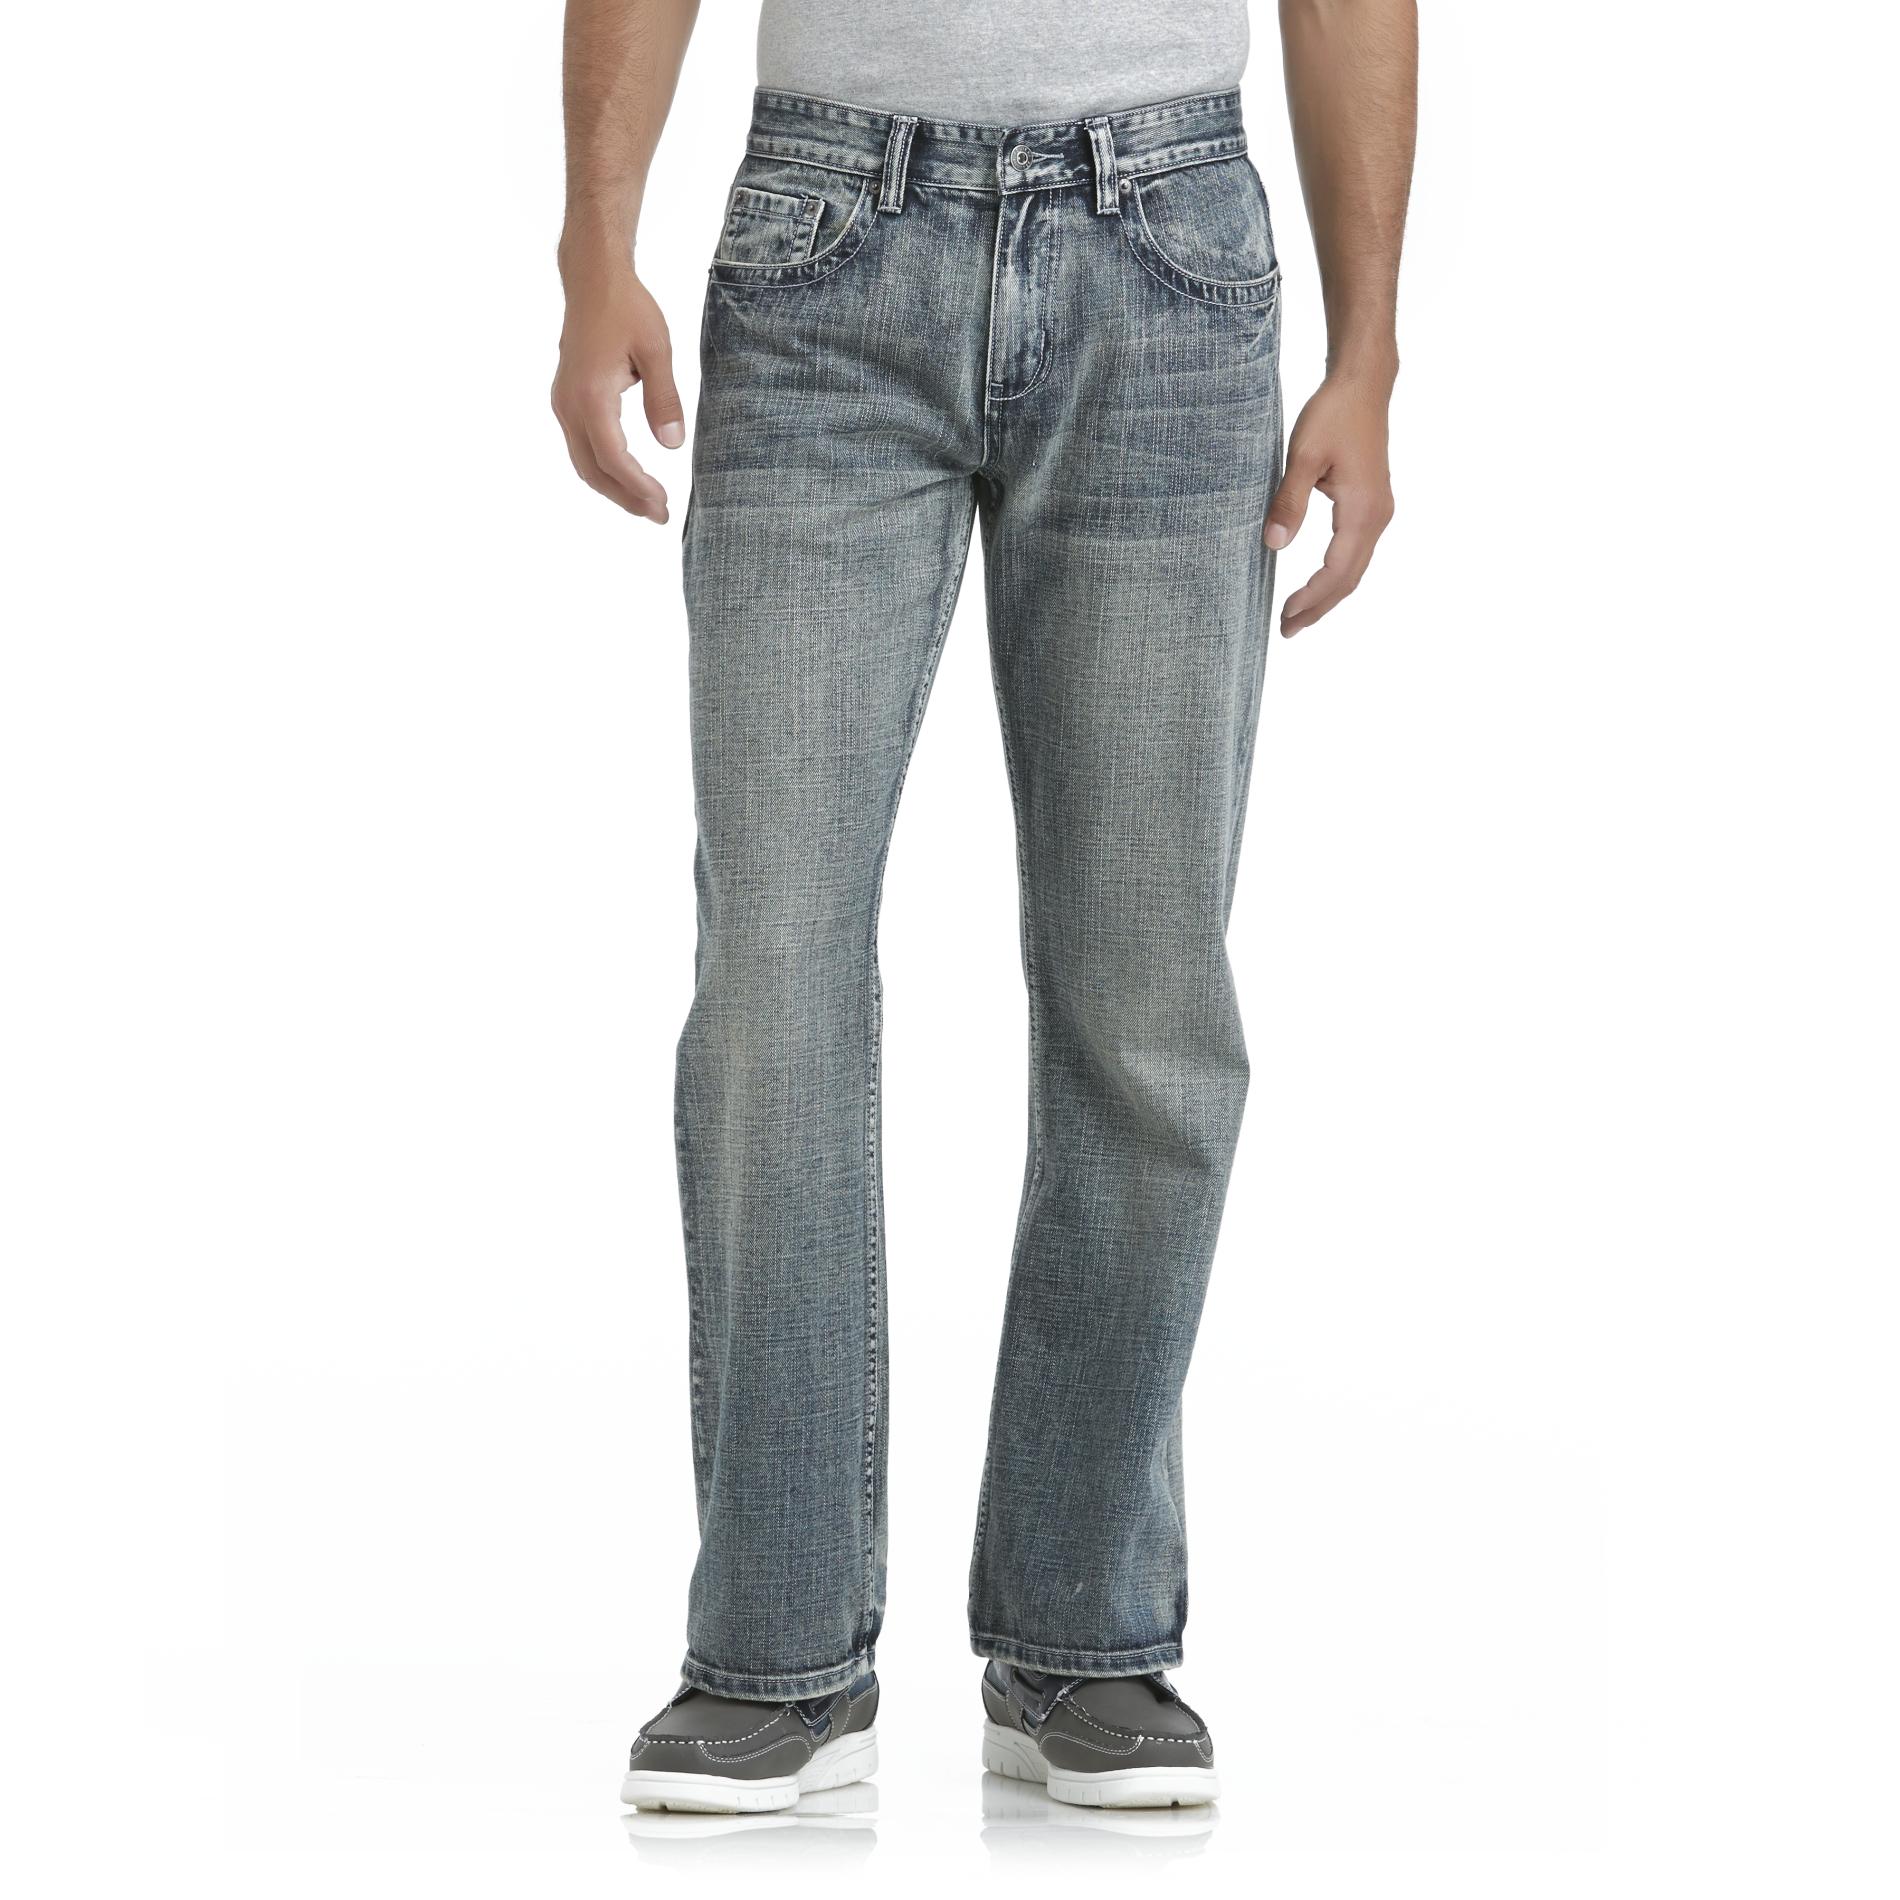 Men’s Route 66 Jeans Only $10.79!